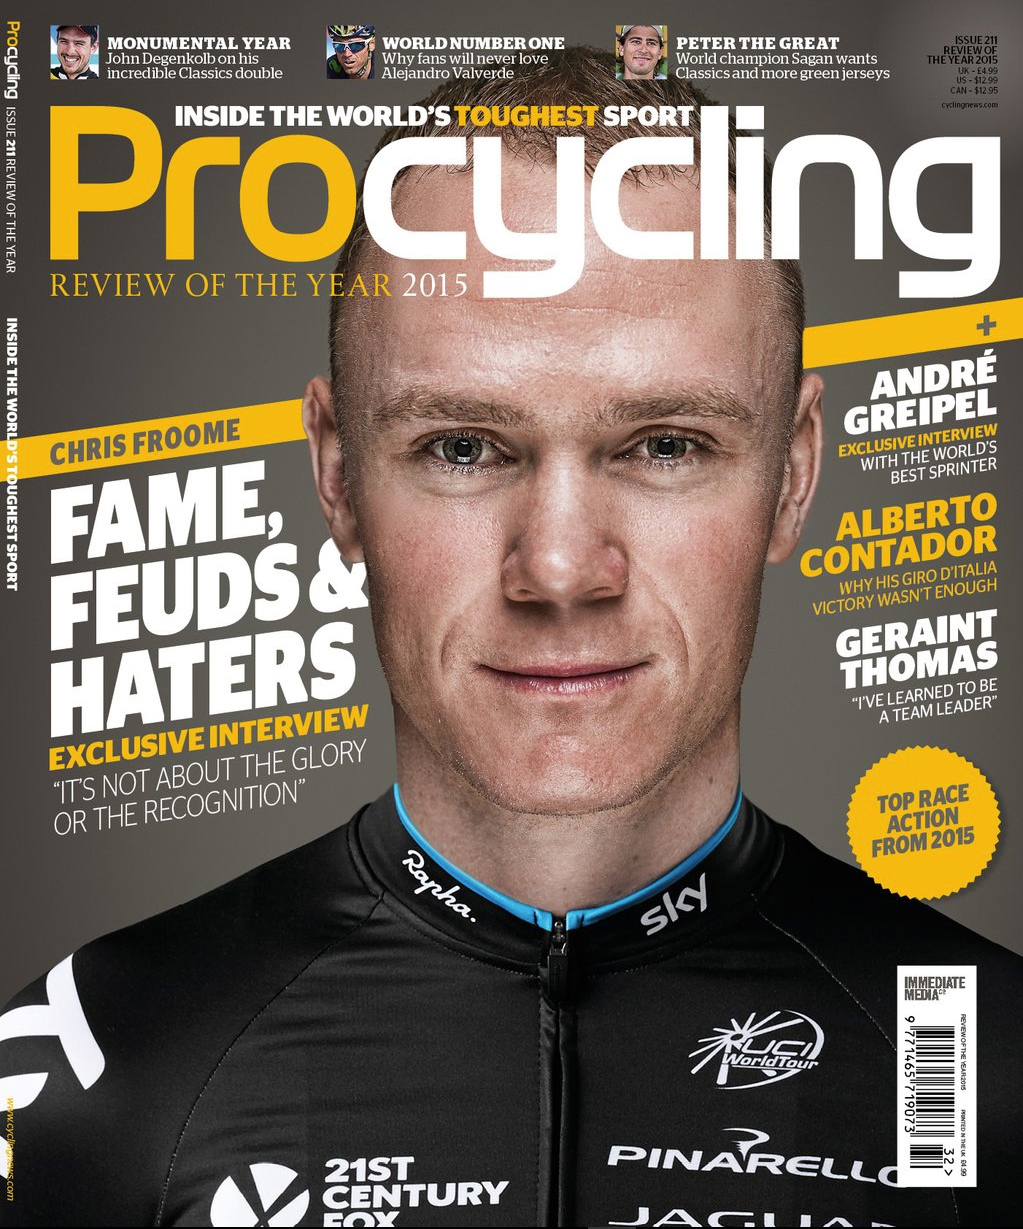 Pro Cycling Chris Froome cover photo